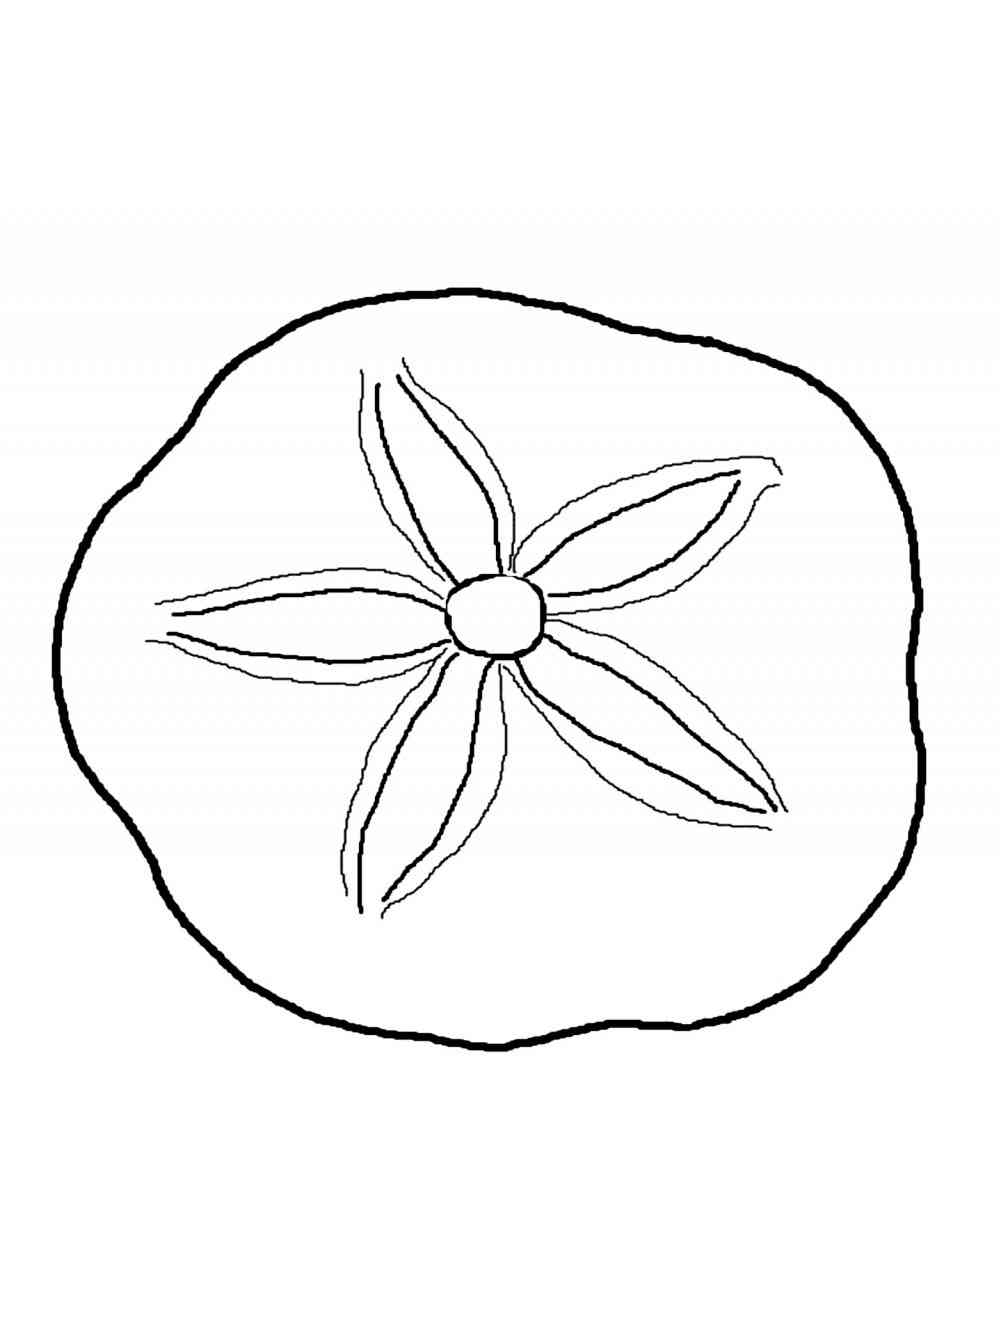 Sand Dollar 2 coloring page